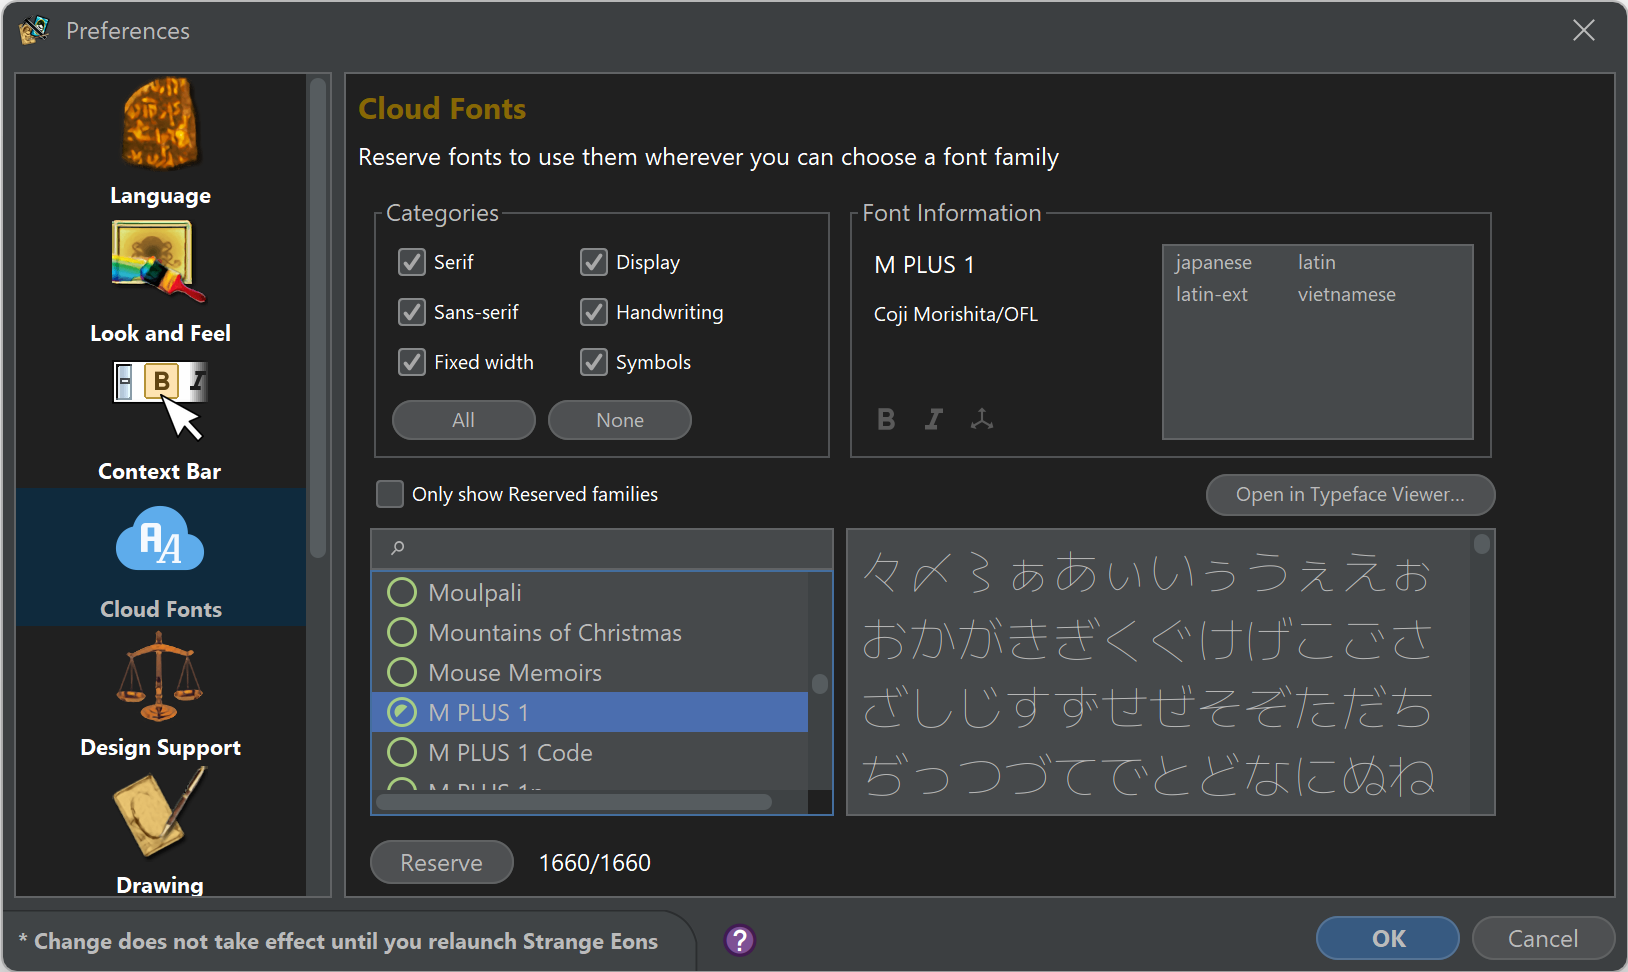 The Cloud Fonts preference category.